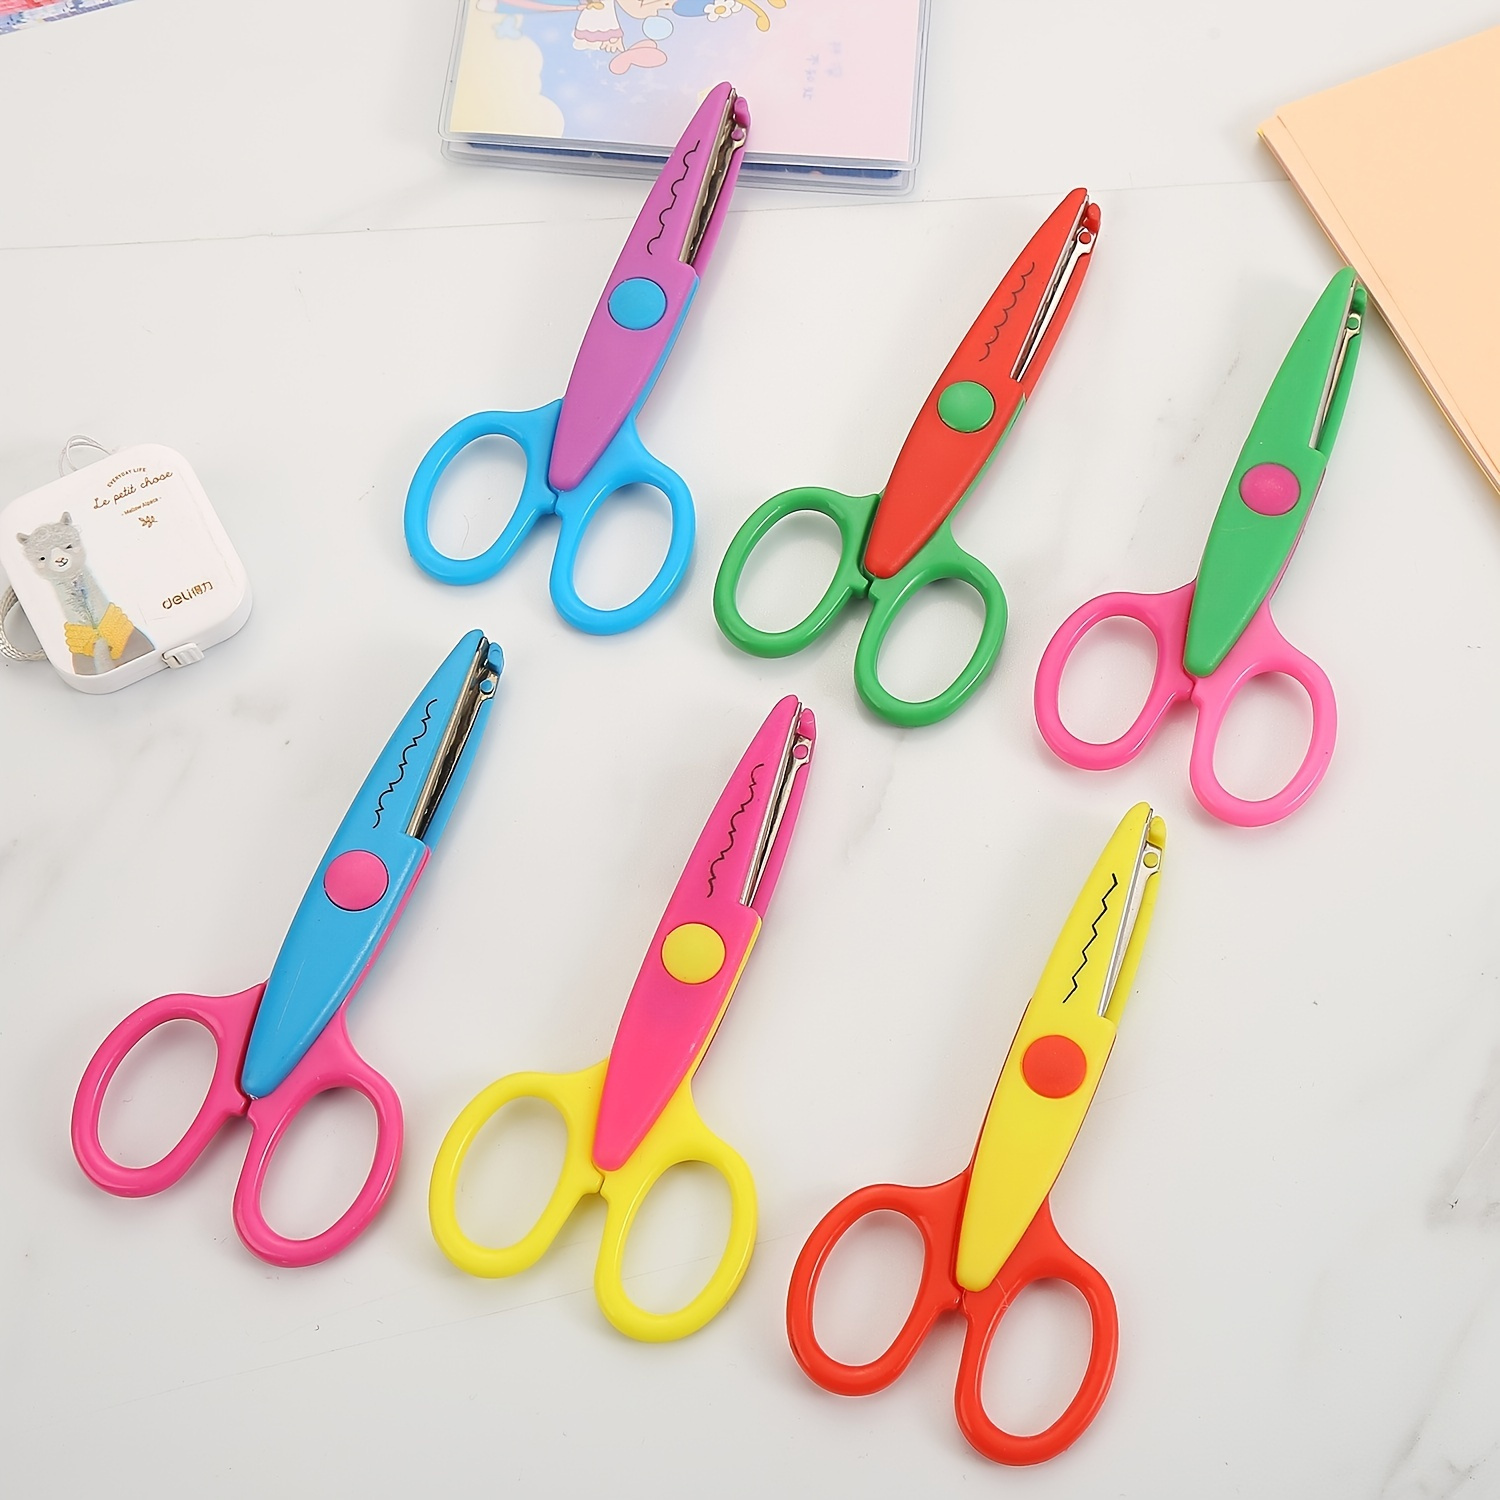 1pc Safety Scissors For Kindergarten Children As Toy, Plastic Kids Scissors  For Arts & Crafts, Paper Shaper Cutting, Diy Projects, School & Christmas  Gifts